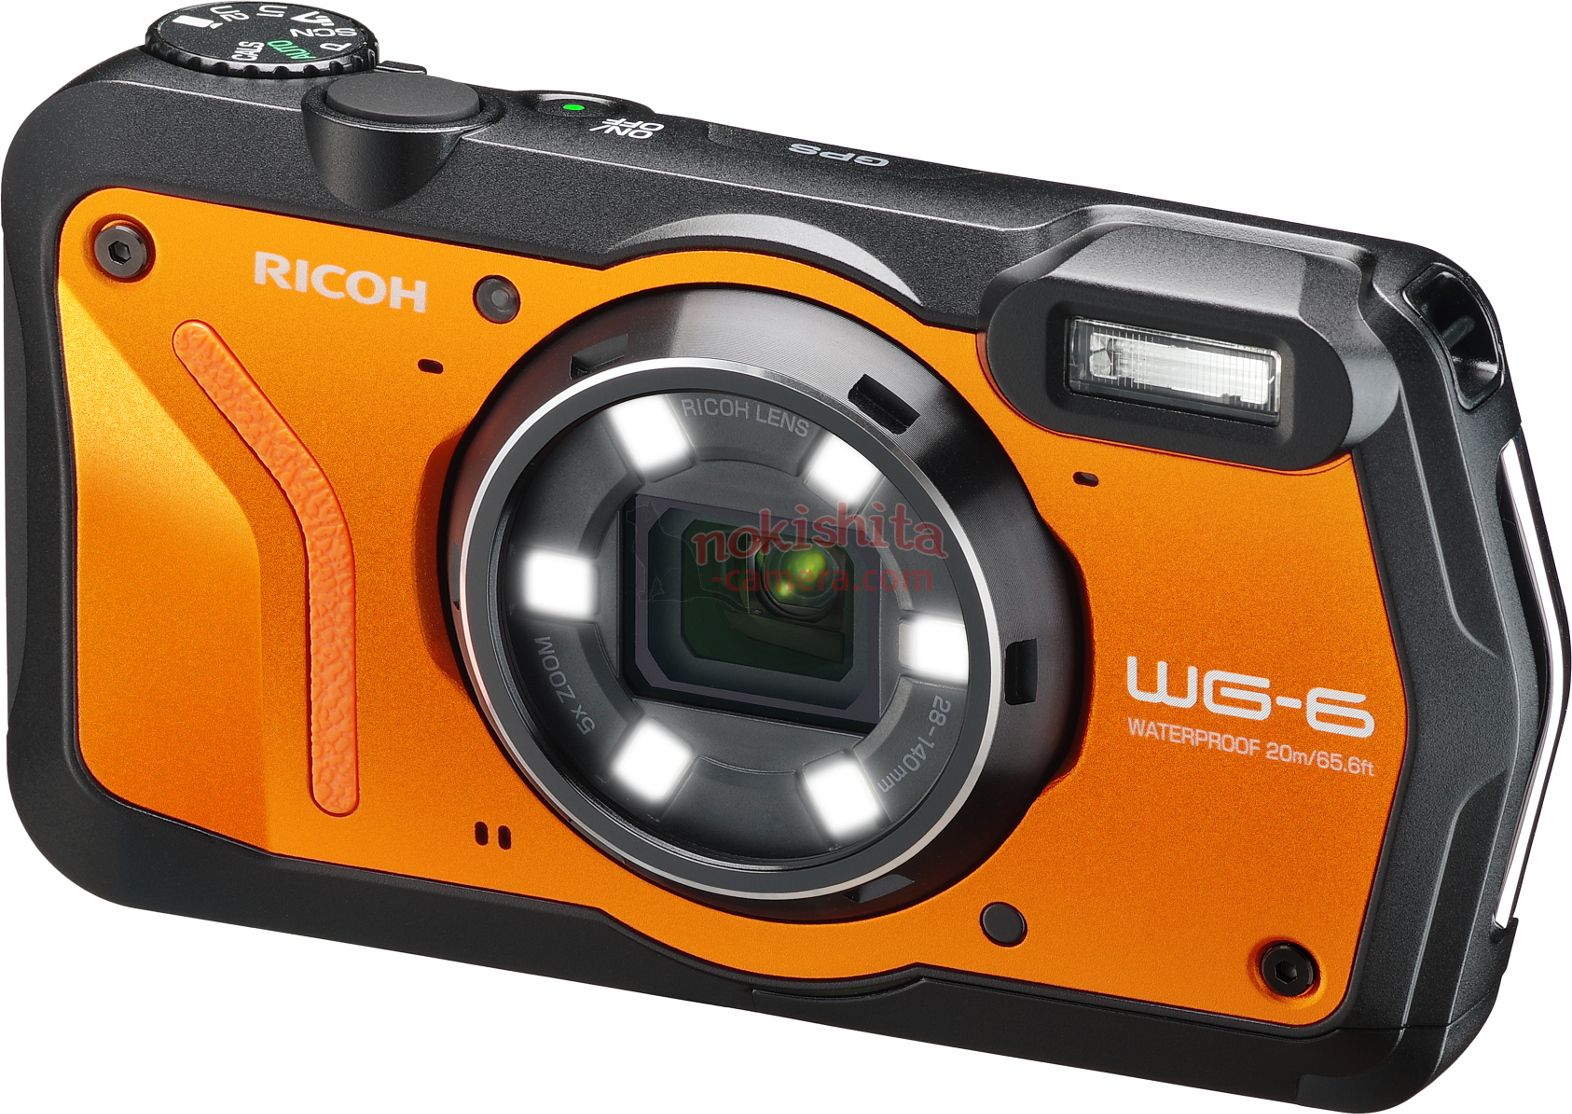 Ricoh WG-6 and Ricoh G900 cameras additional information - Photo 